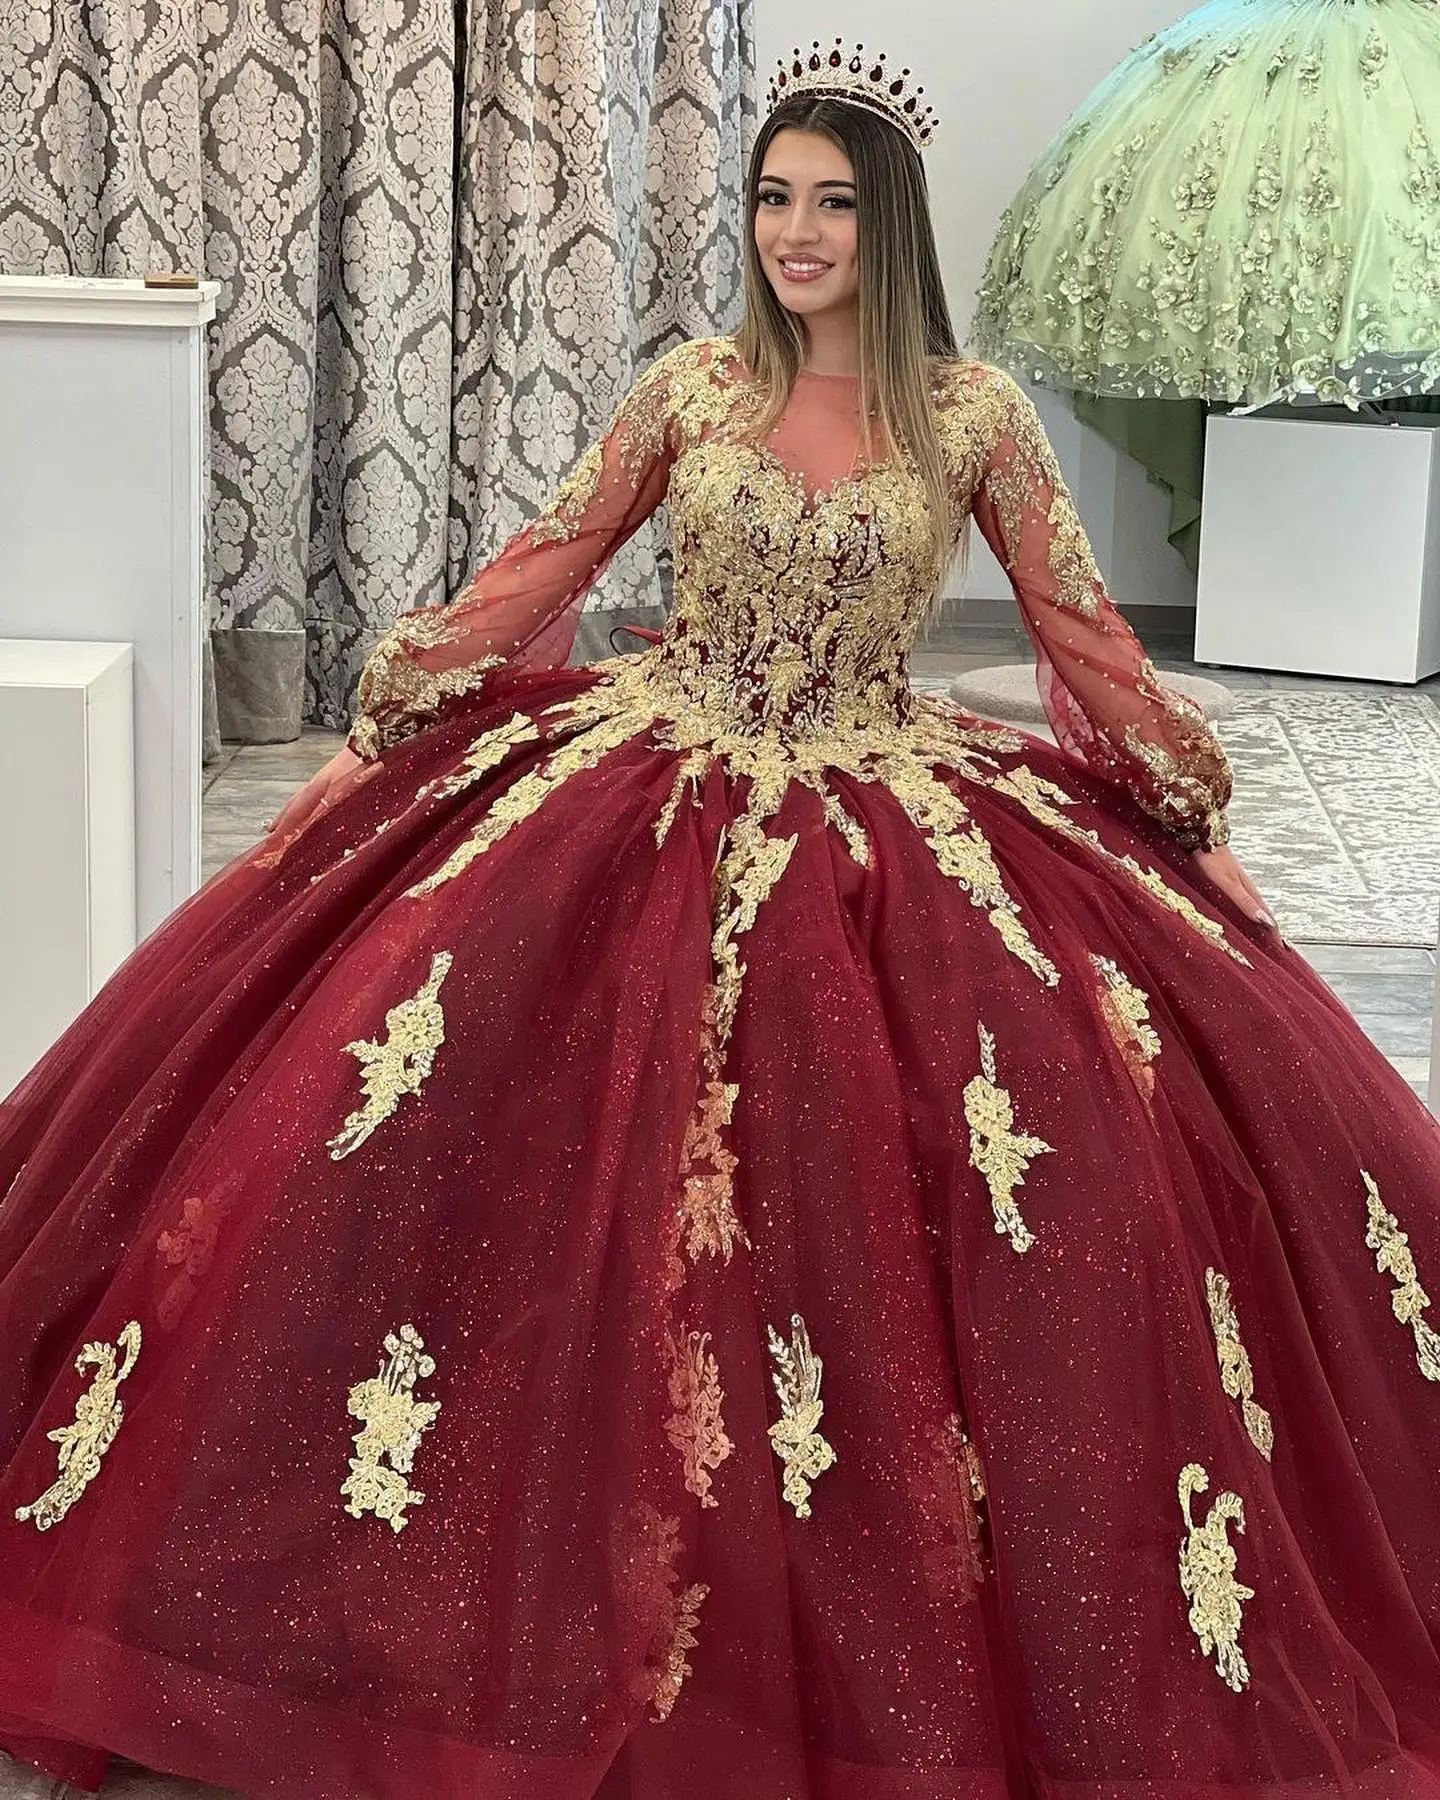 

New Burgundy Quinceanrea Dresses 2022 Red Sweetheart Off Shoulder Lace Applique Prom Dress Sweet 15 16 Princess Pageant Gowns